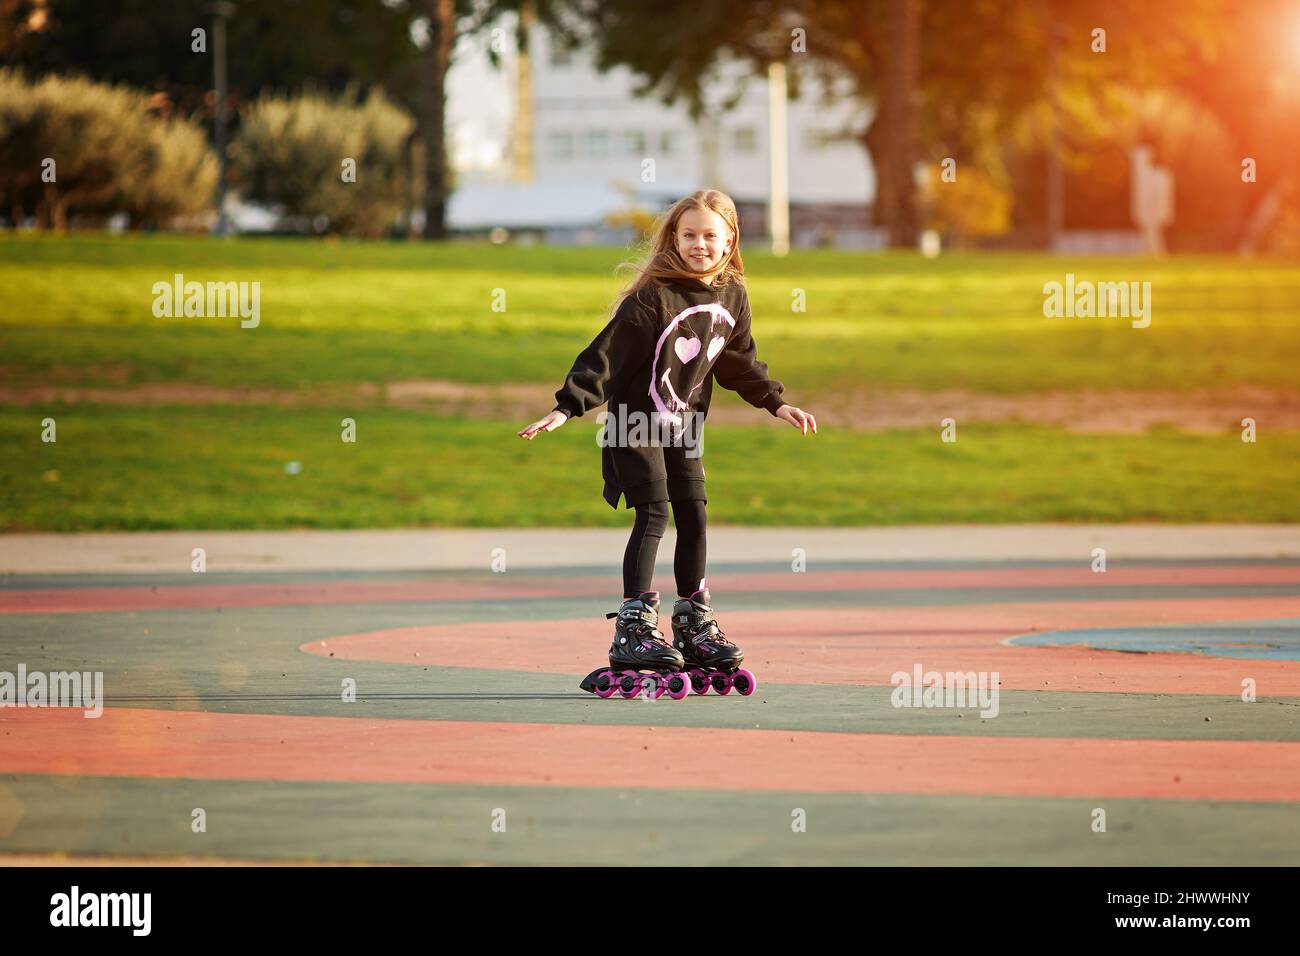 portrait of young child or teen girl roller skating outdoors, fitness, well being, active healthy lifestyle Stock Photo